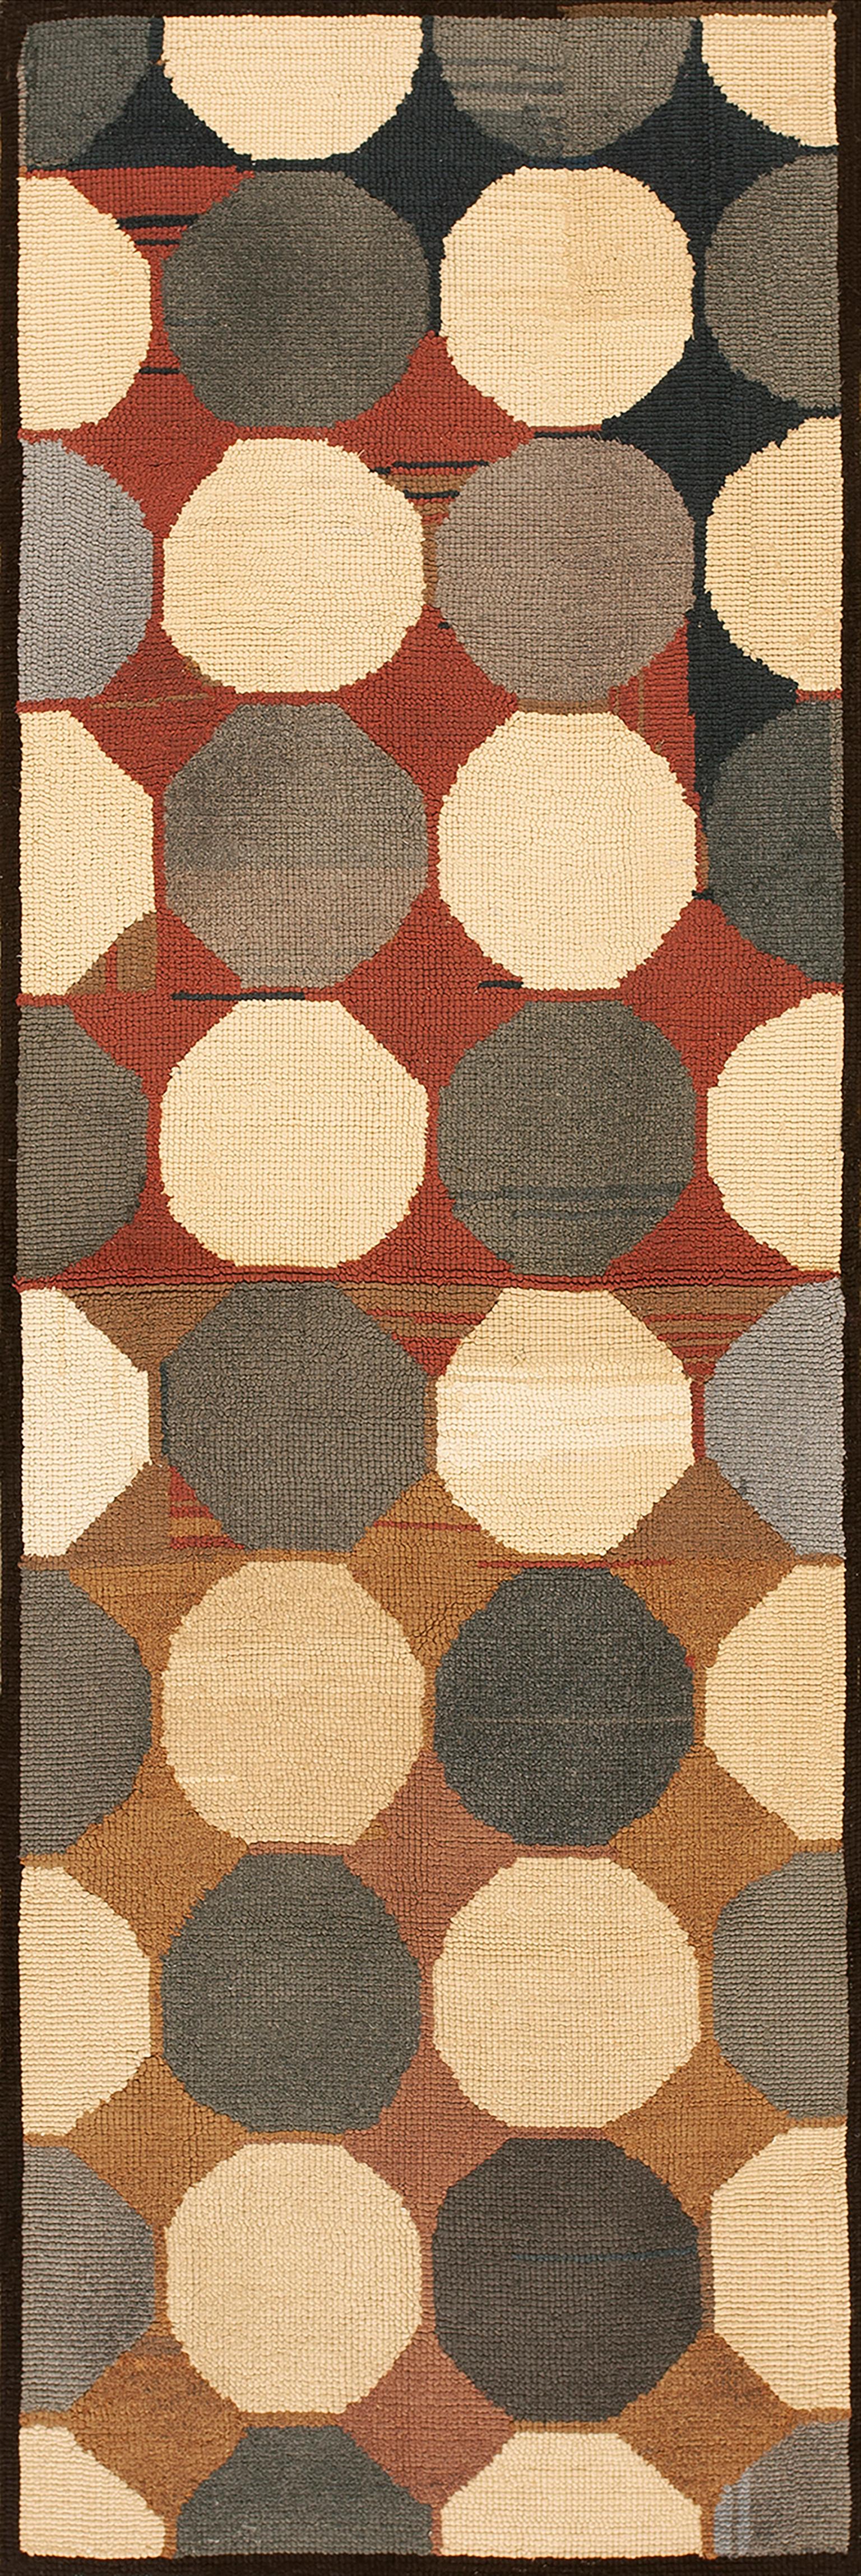 Mid 20th Century American Hooked Rug ( 4'1'' x 8'9'' - 125 x 267 ) For Sale 3